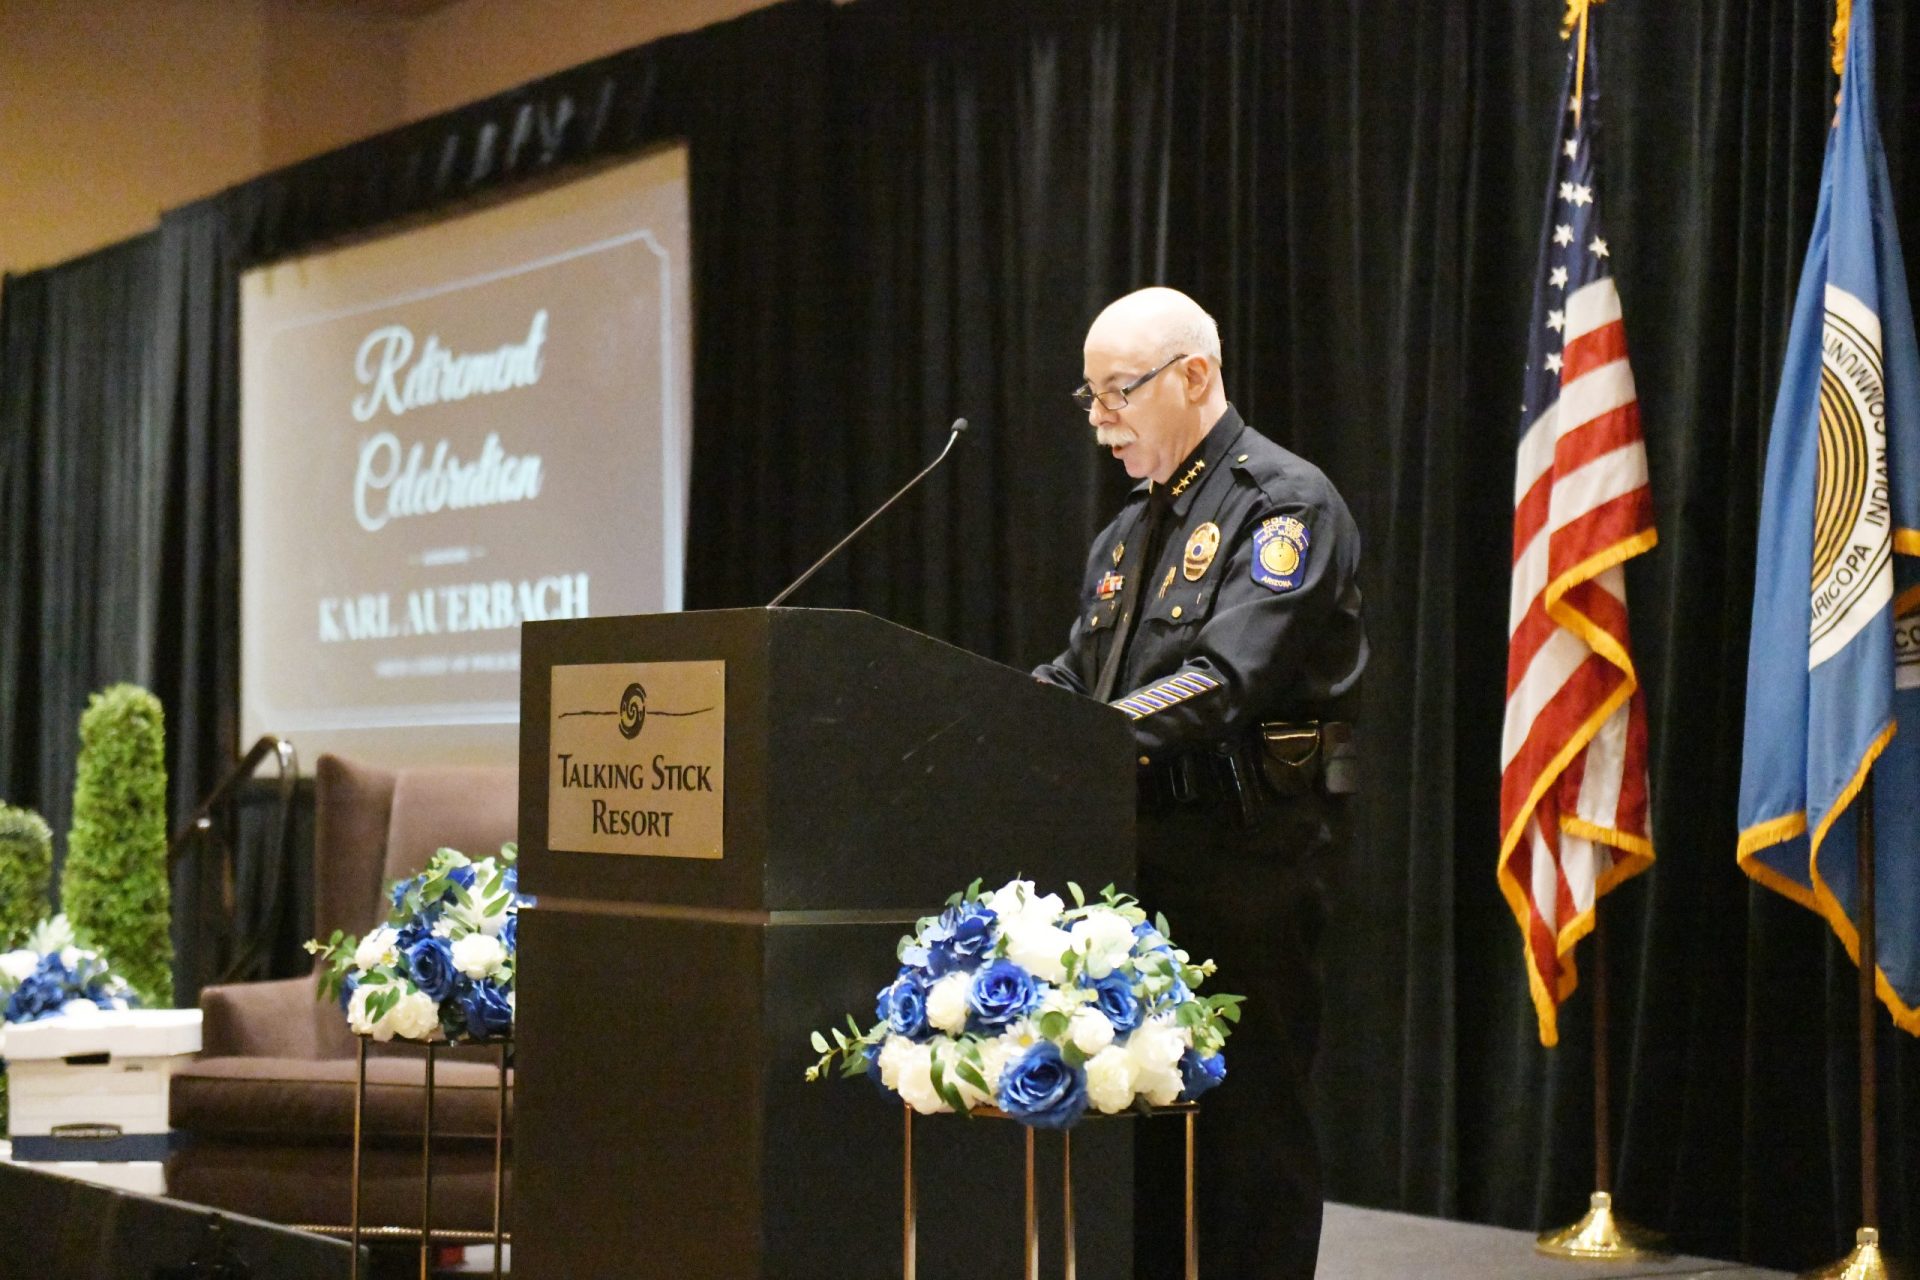 Police Chief Karl Auerbach Retires After 32 Years of Dedication to the Community